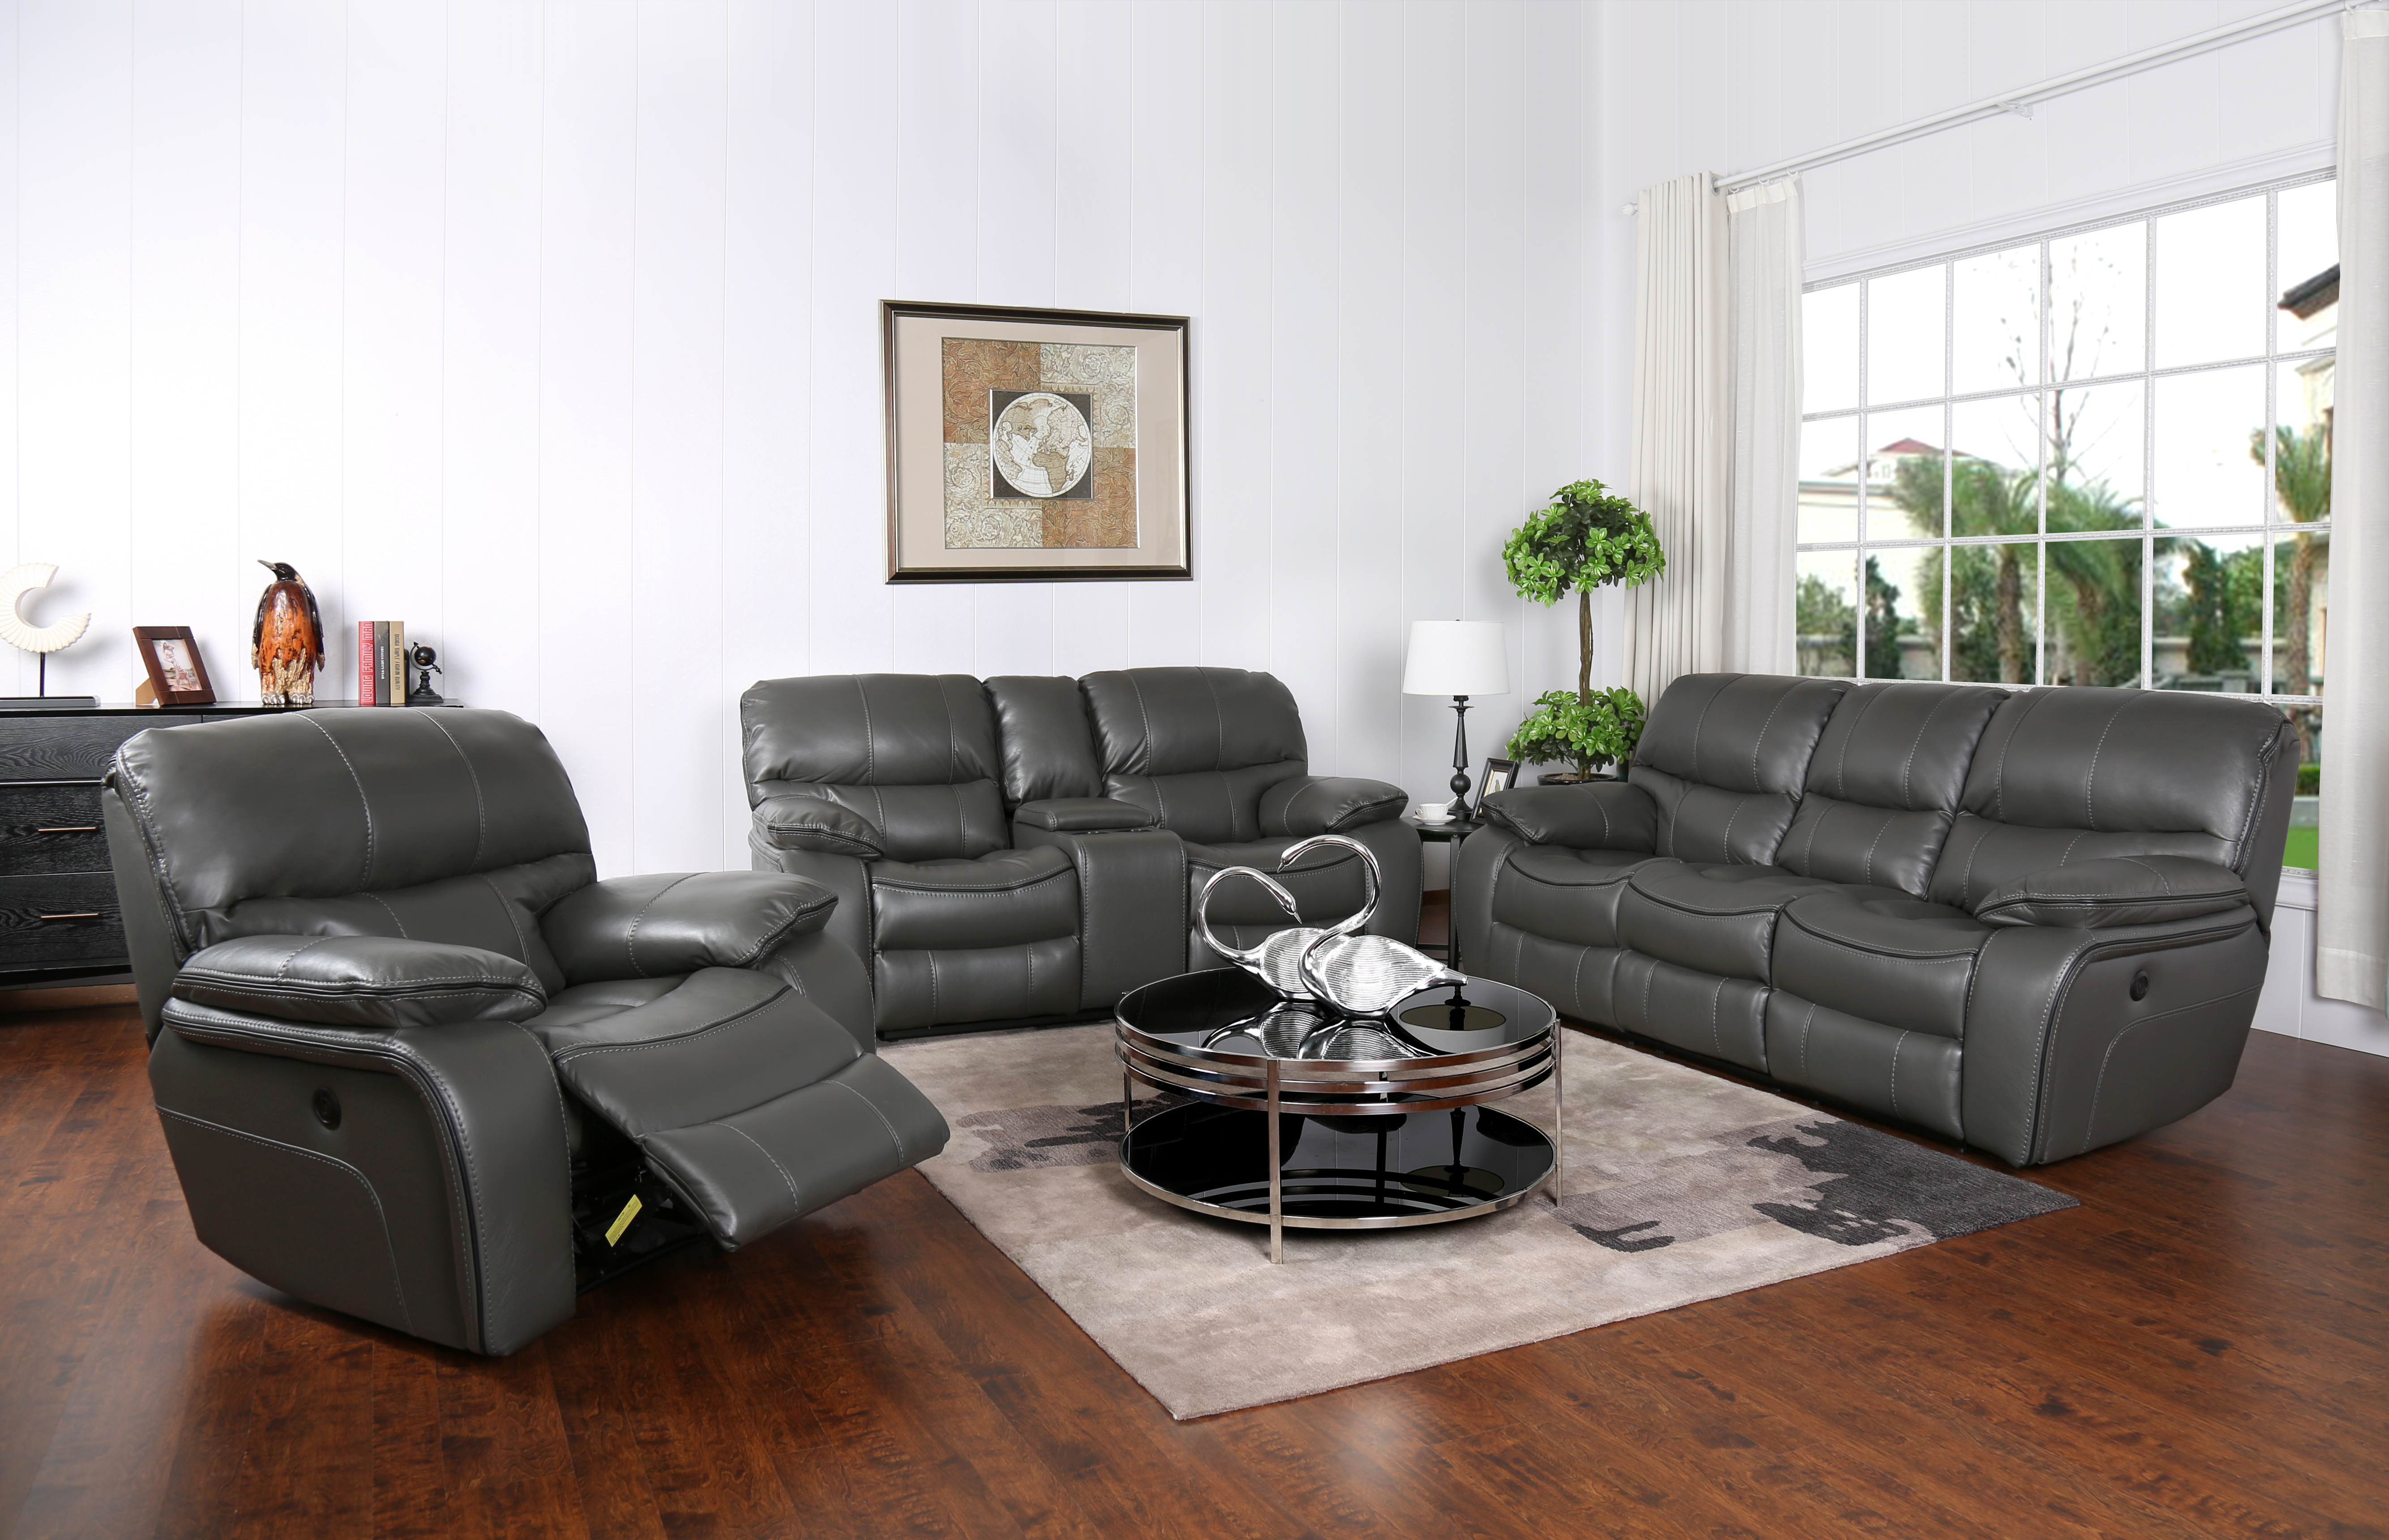 Madrid Leather Gel Reclining Sofa, Gray Leather Reclining Sofa And Loveseat